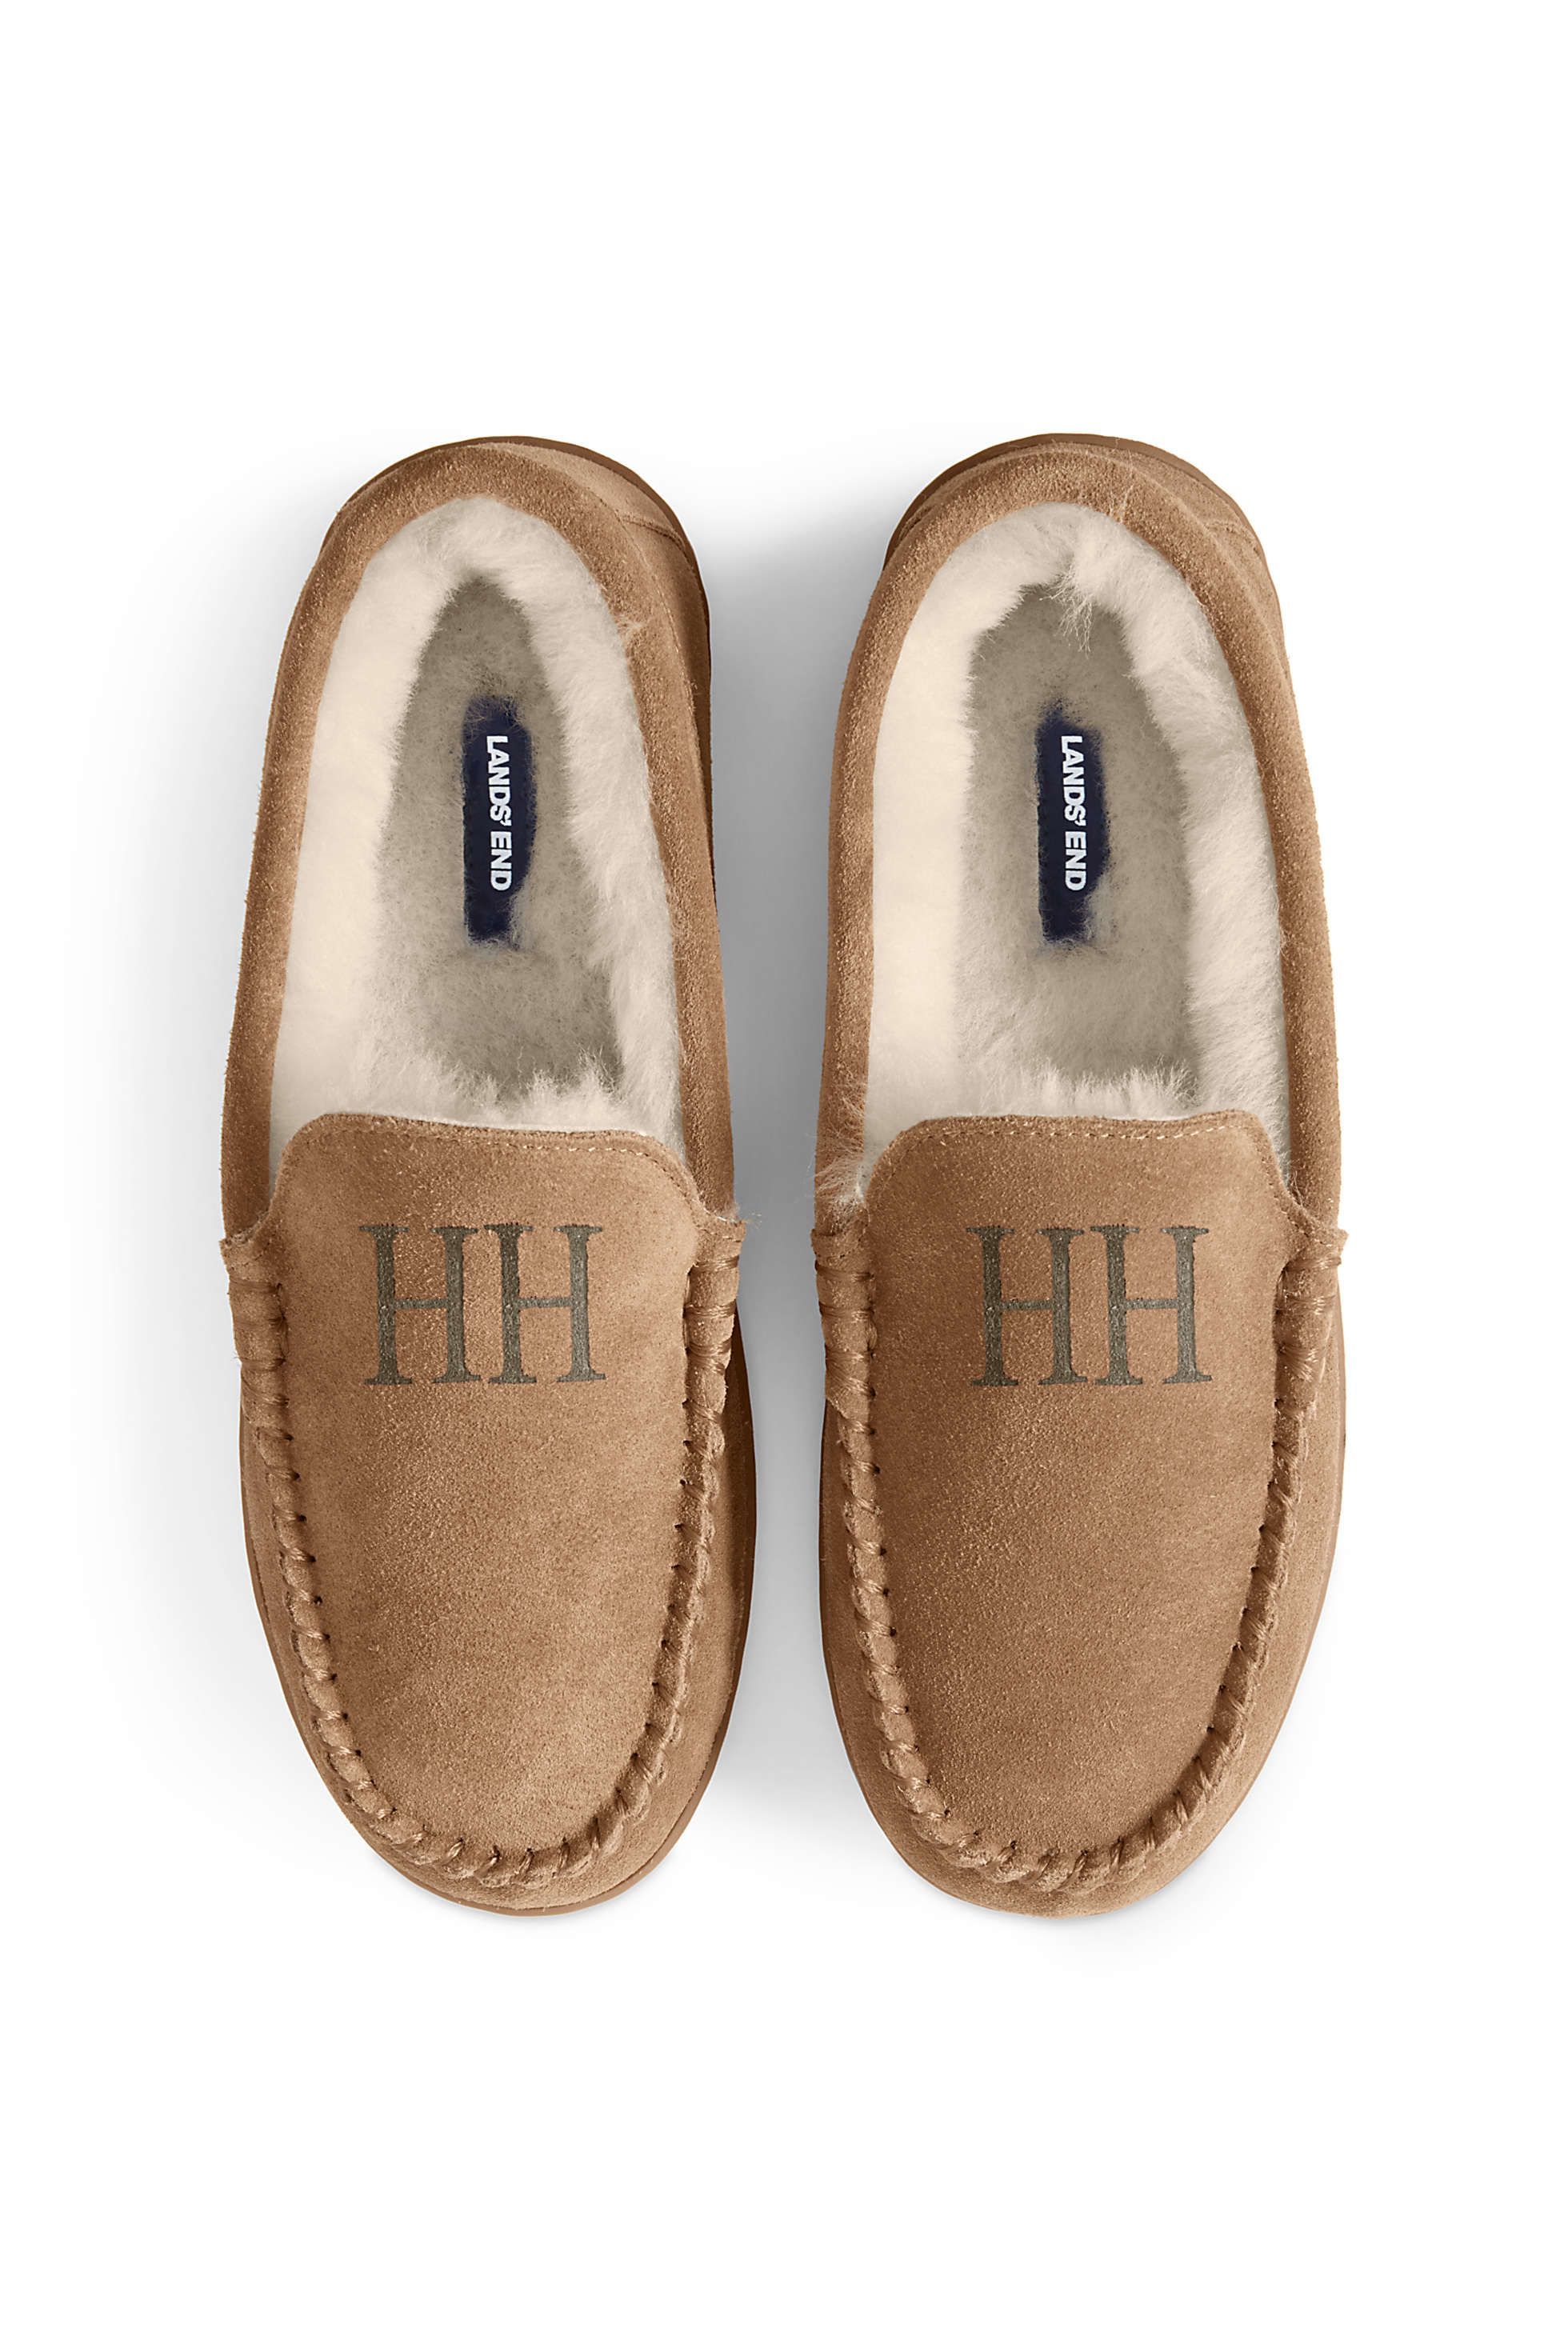 mens suede house slippers